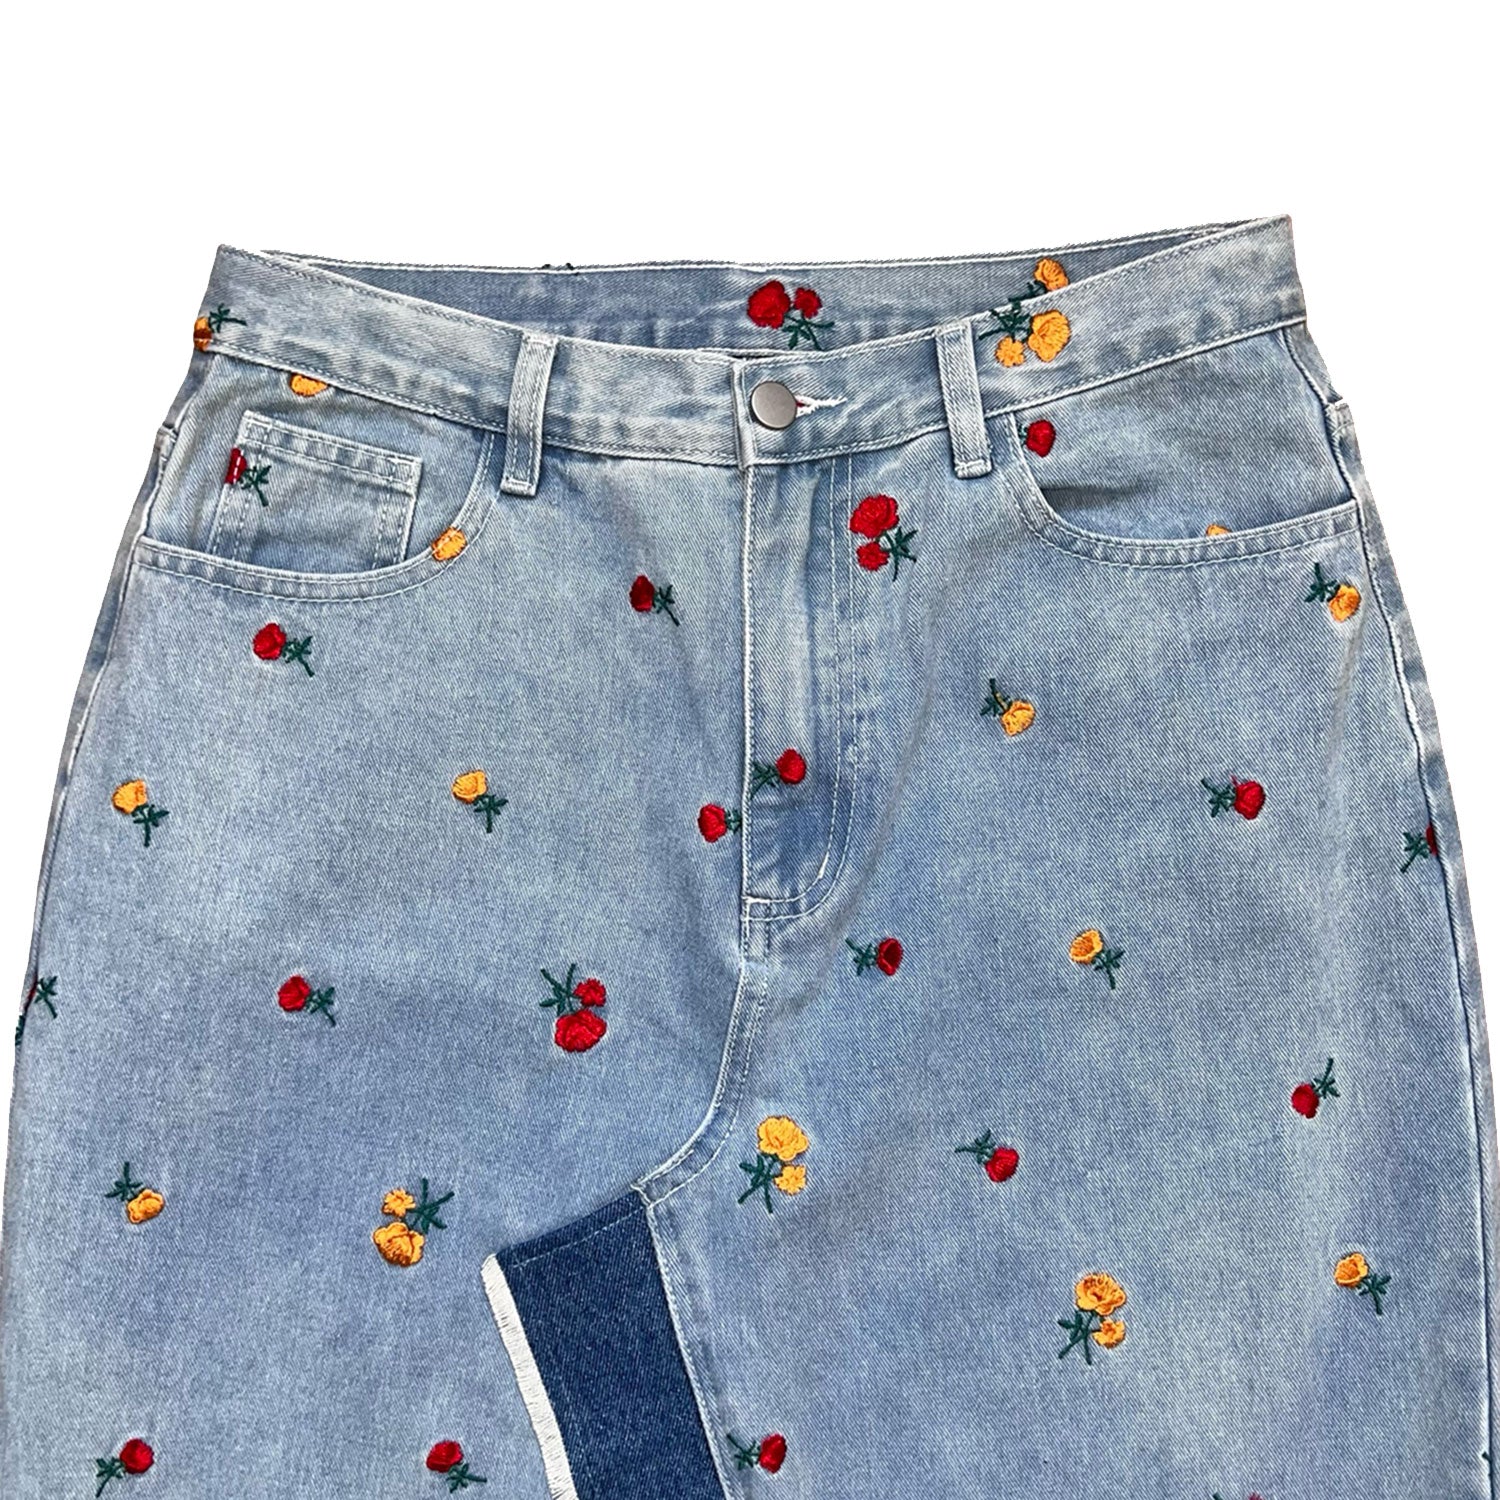 Denim Skirt In Light Blue And Embroidered Roses